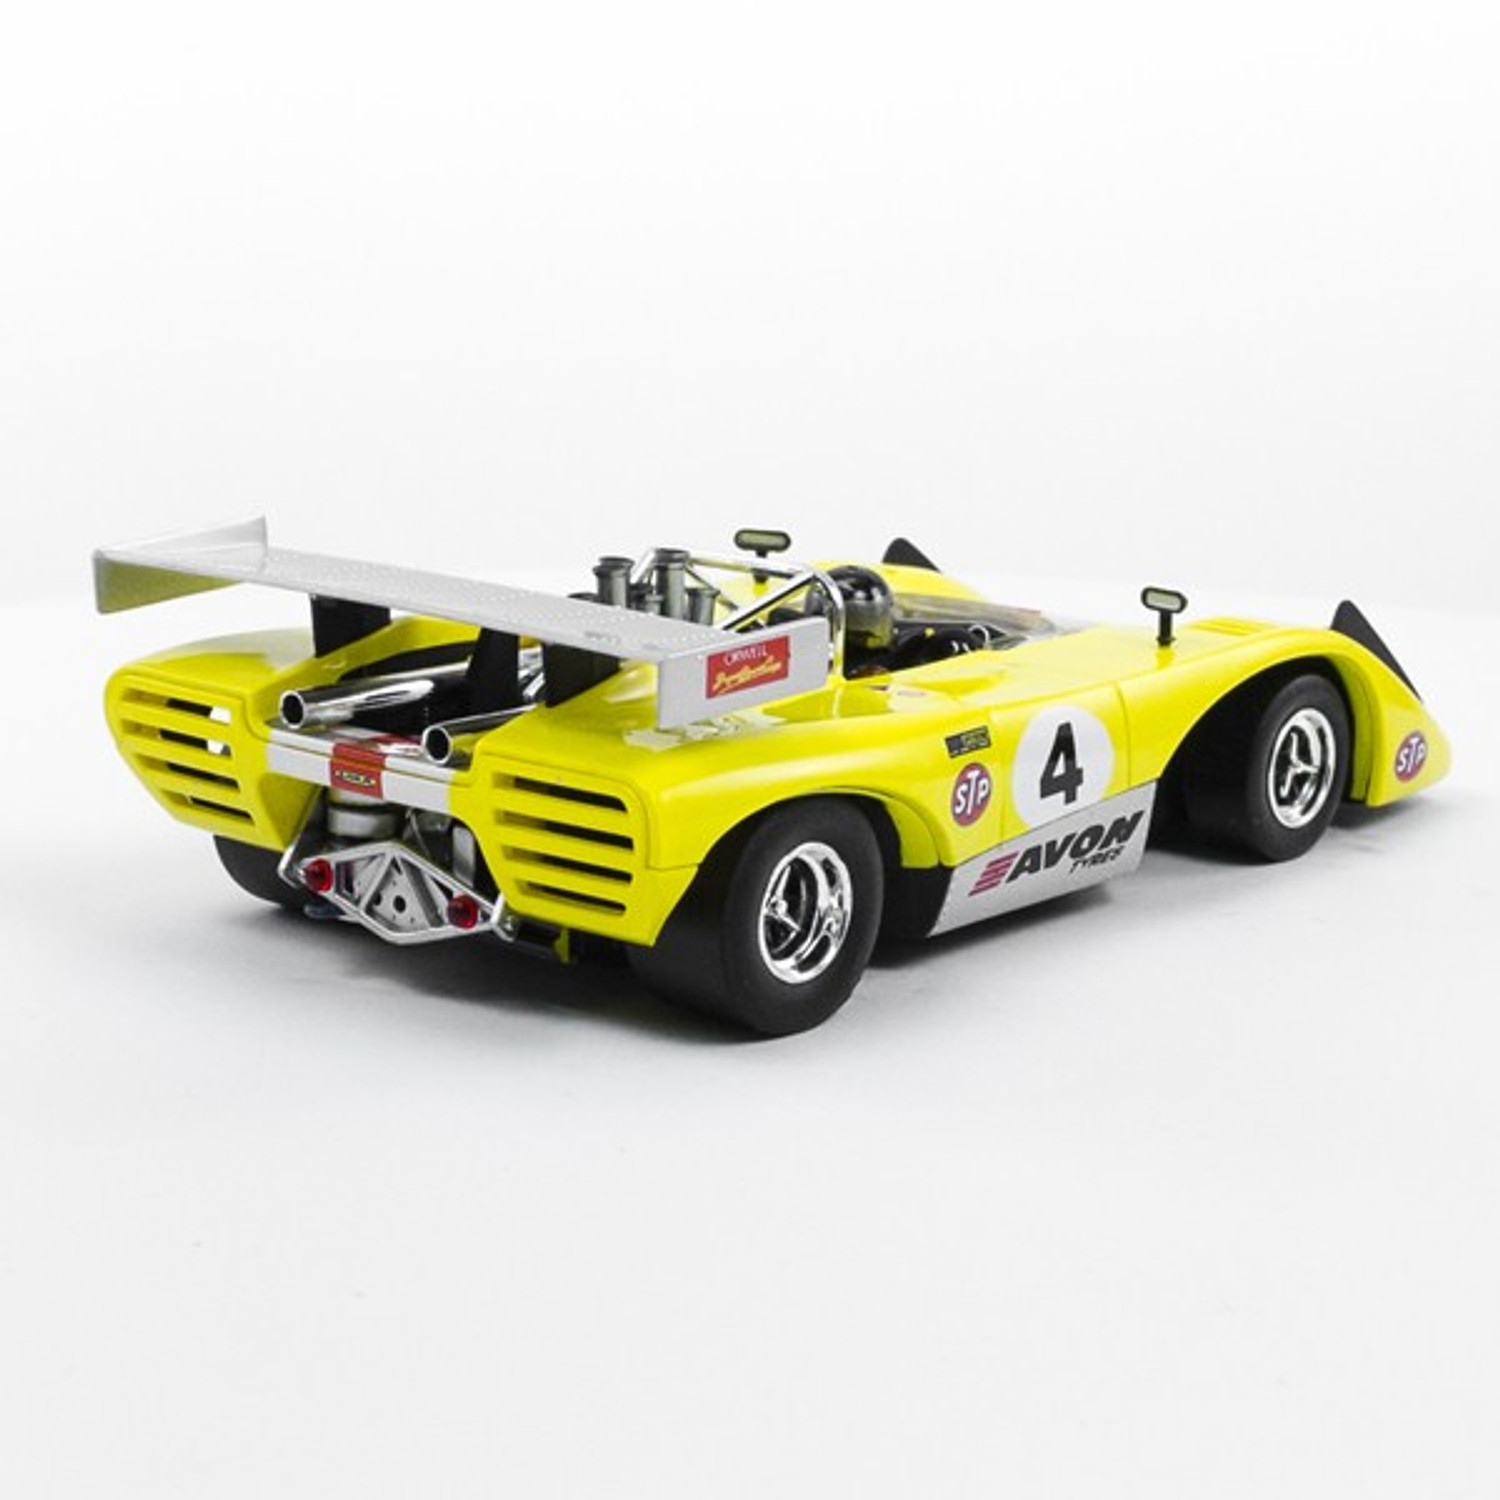 Stock Number: 16217 - Yellow Open Top Number 4 Car by Unknown